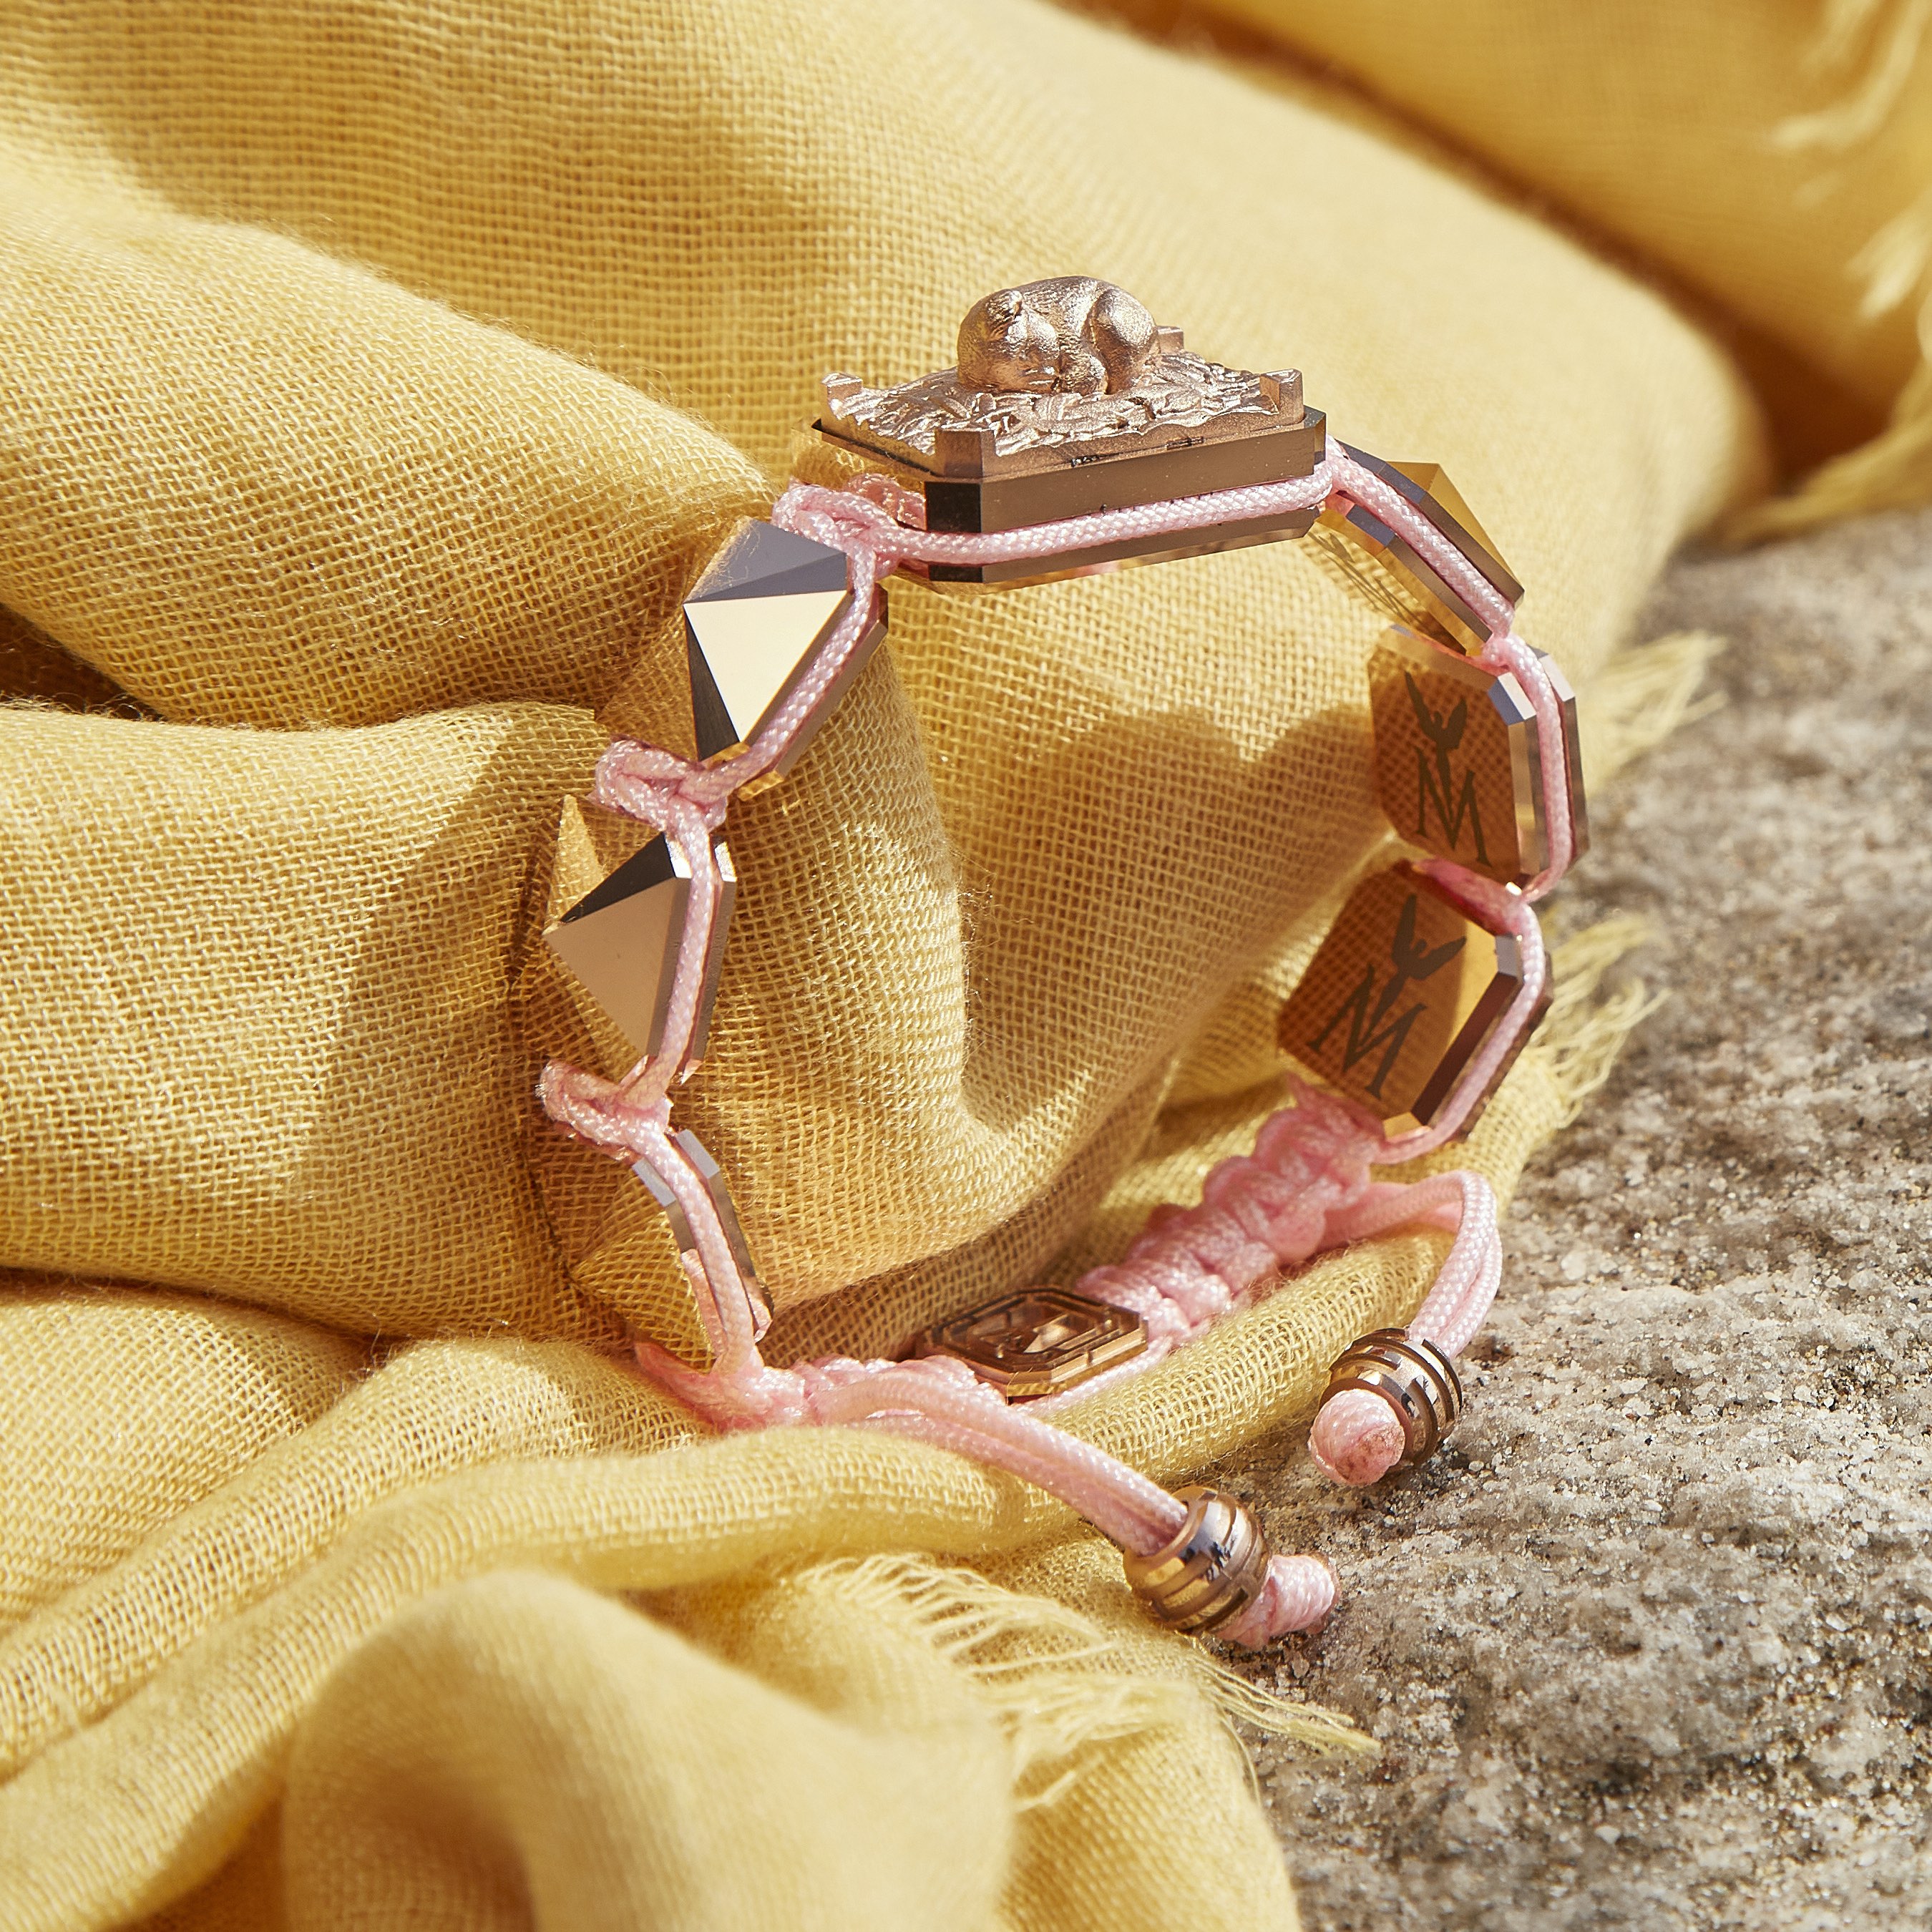 I Love My Baby bracelet with ceramic and sculpture finished in 18k Rose Gold complemented with a pink coloured cord.